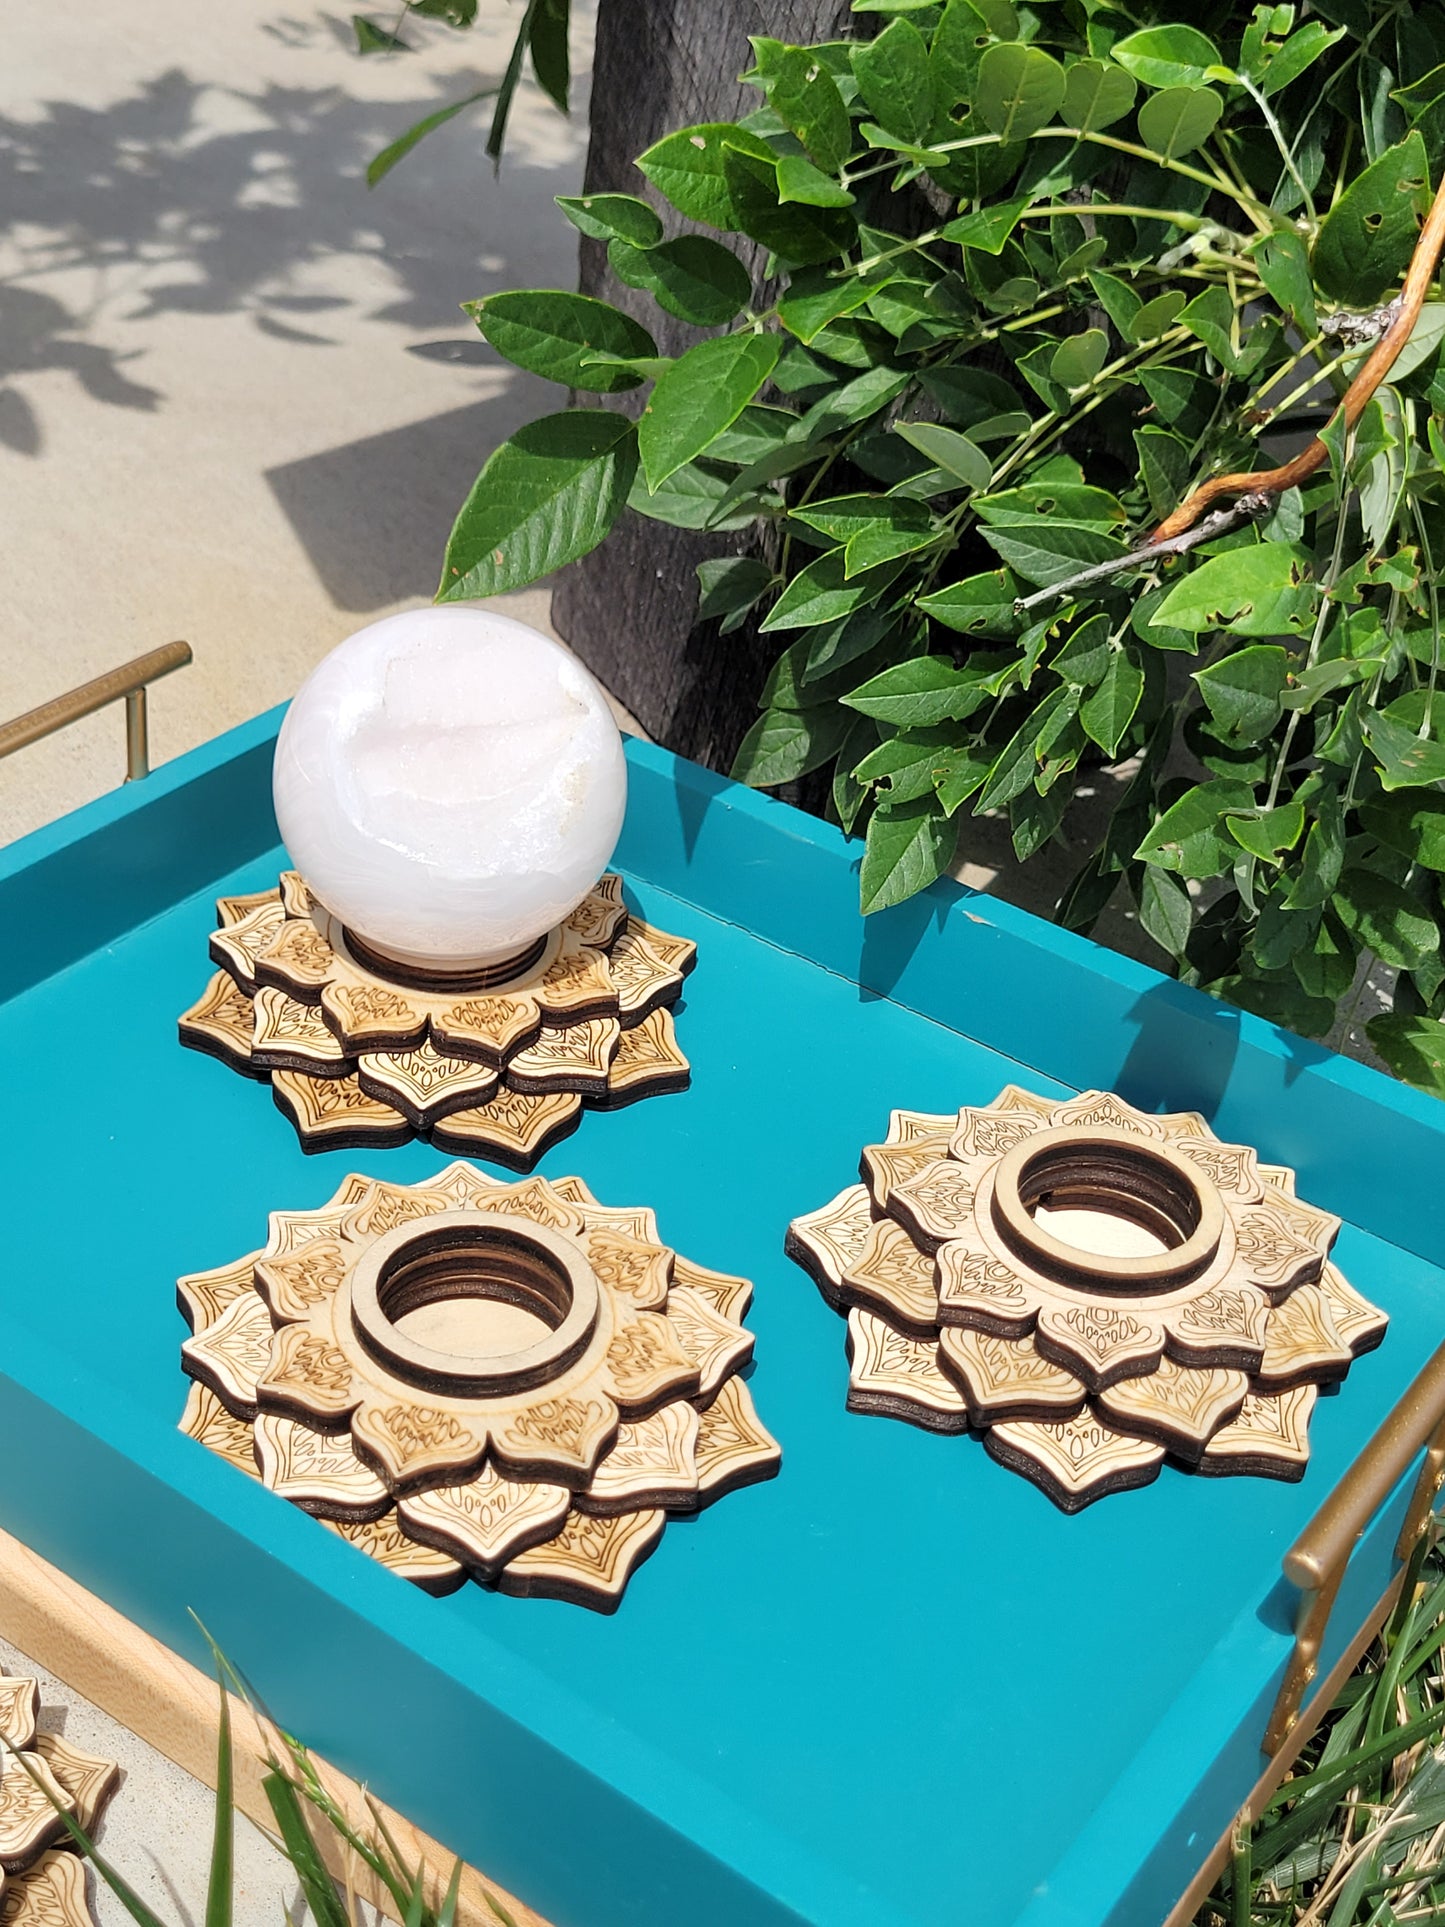 Large Wooden Lotus Sphere Stands